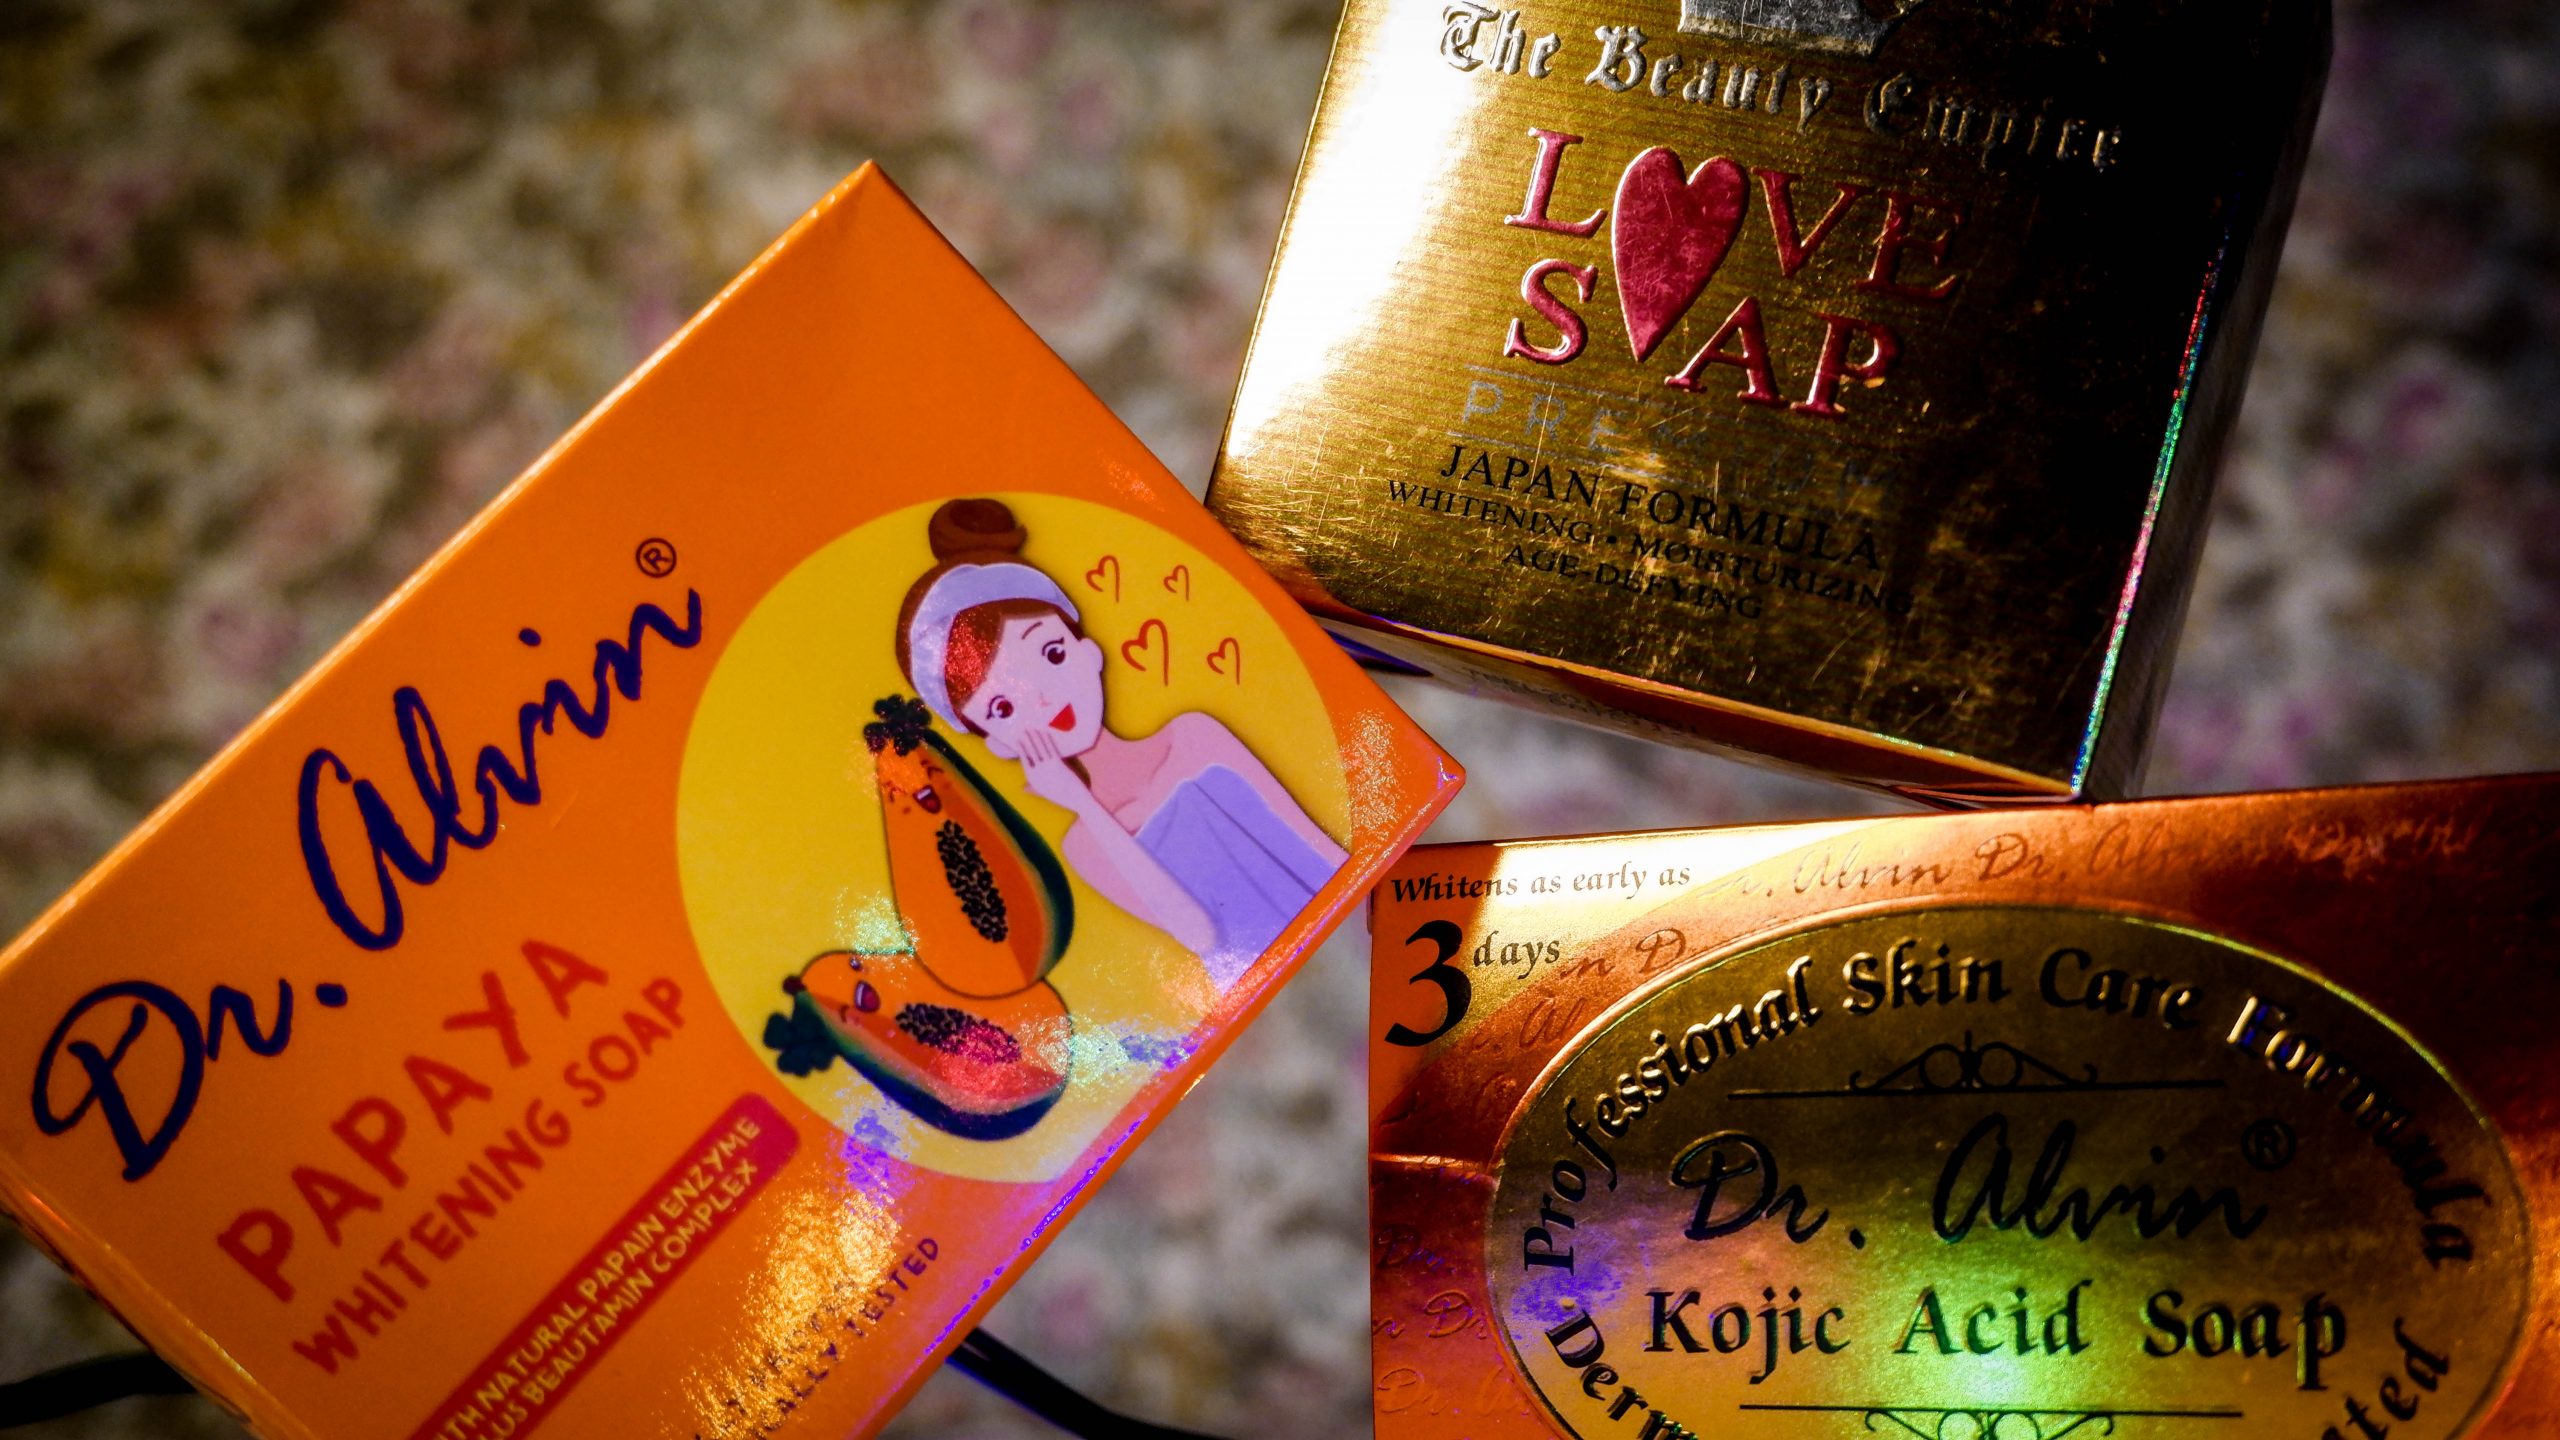 Dr. Alvin® Kojic Acid Soap: Instant glow skin in just a few days!